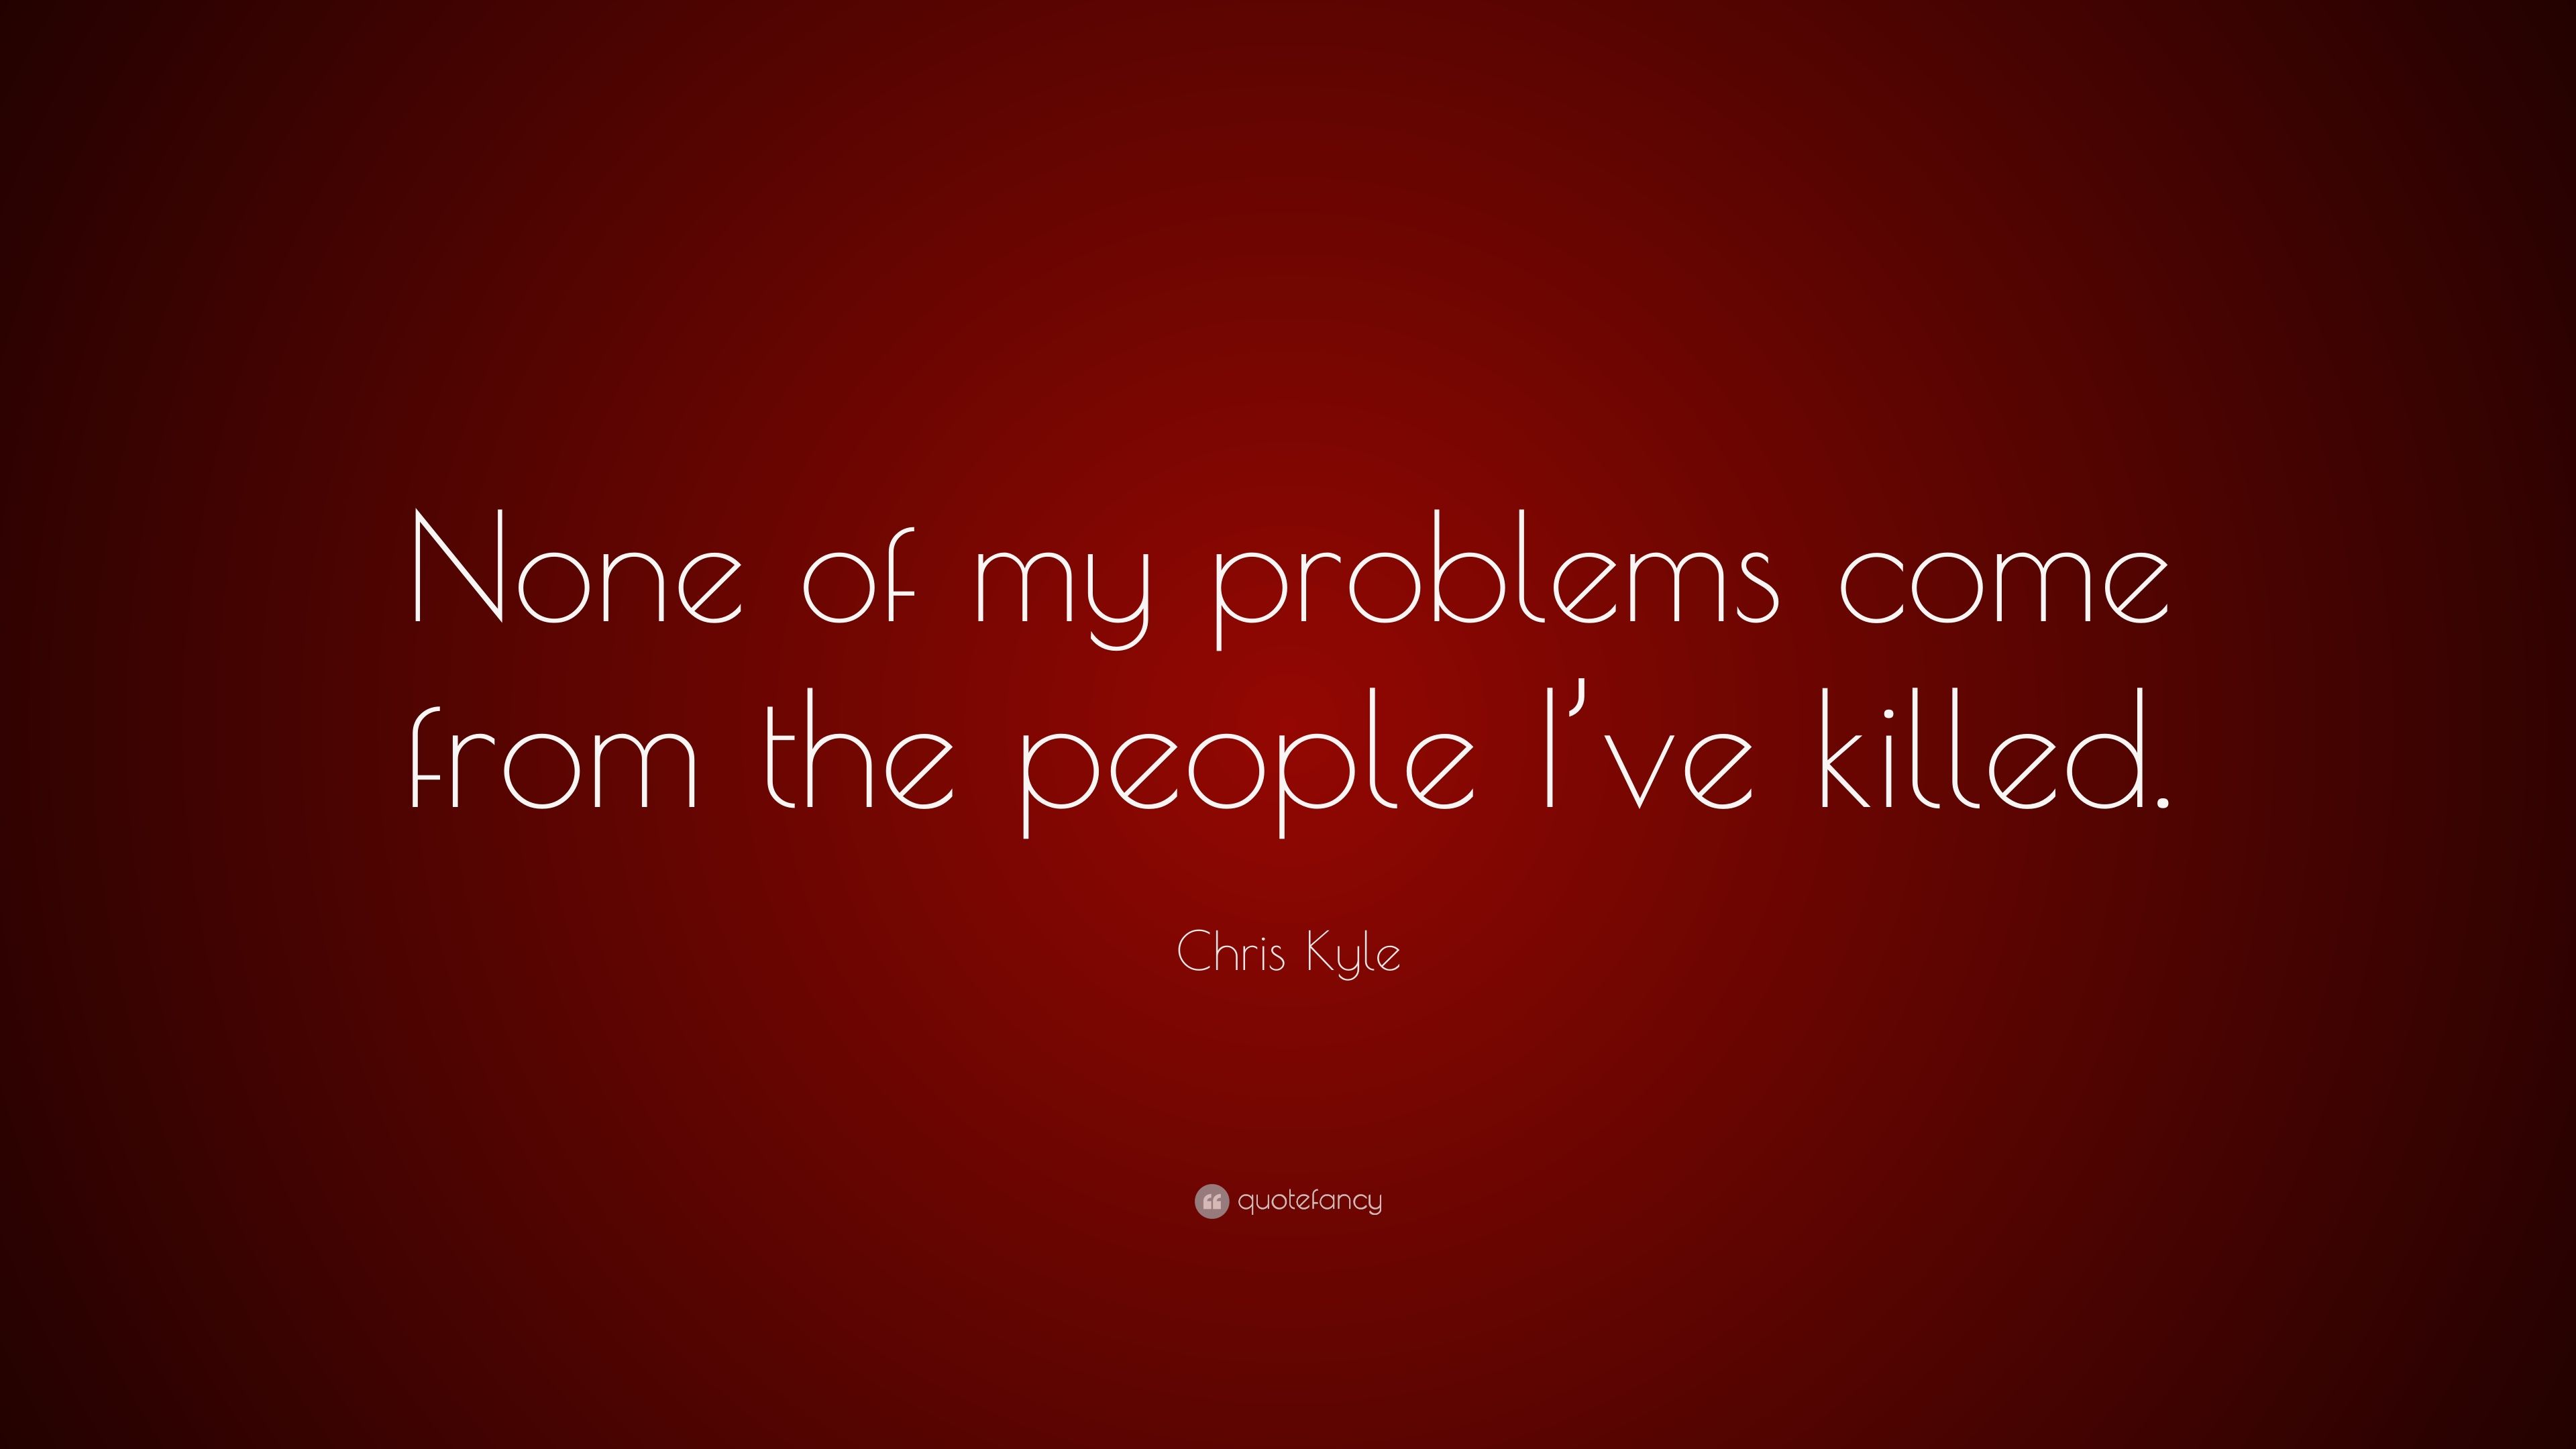 Chris Kyle Quote: “None of my problems come from the people I've